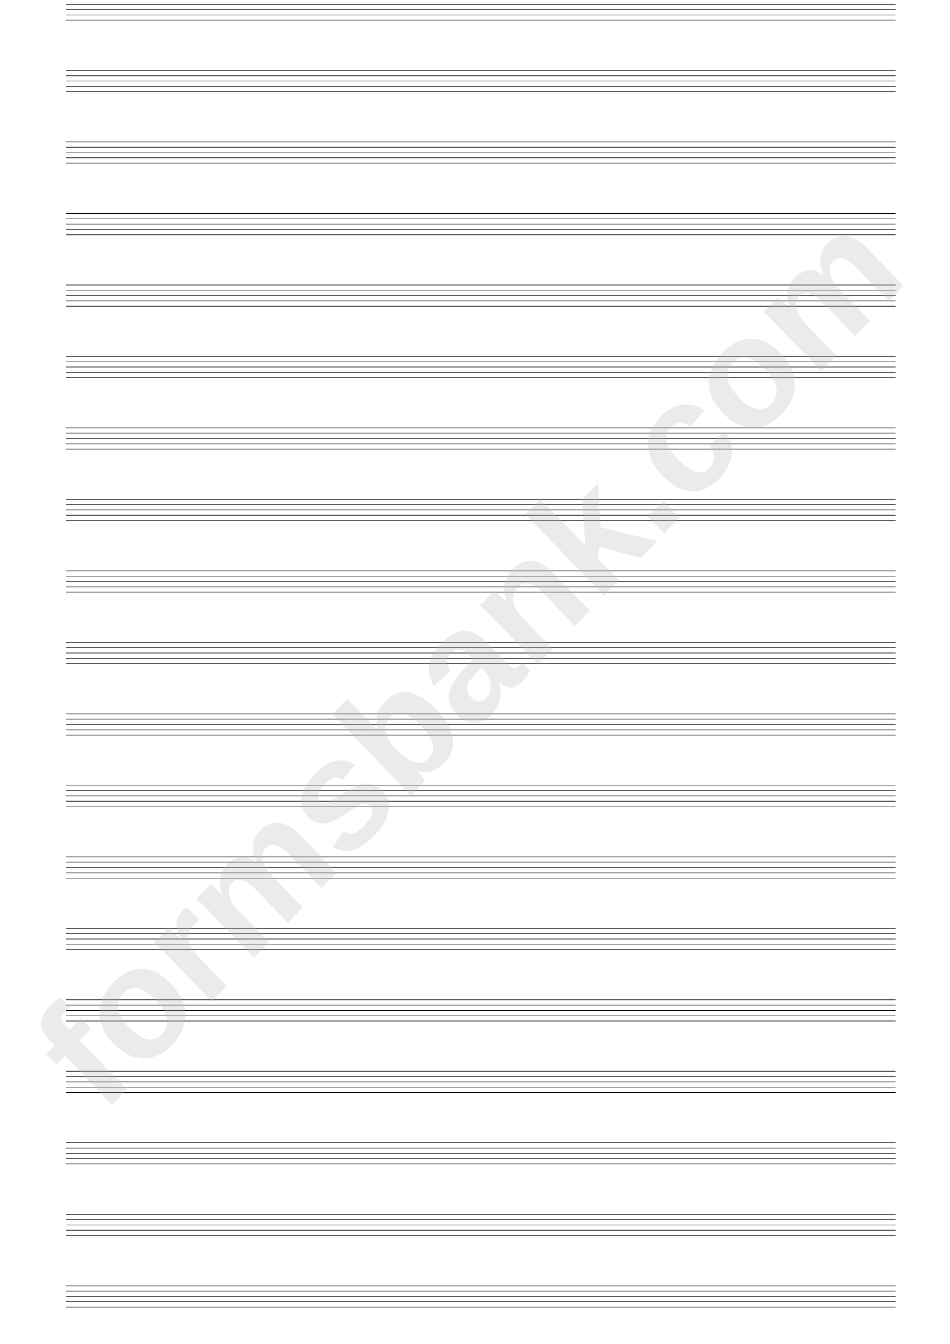 20-Stave With No Clef To One Page (Us Legal - 8.5" X 14" Portrait) Blank Sheet Music